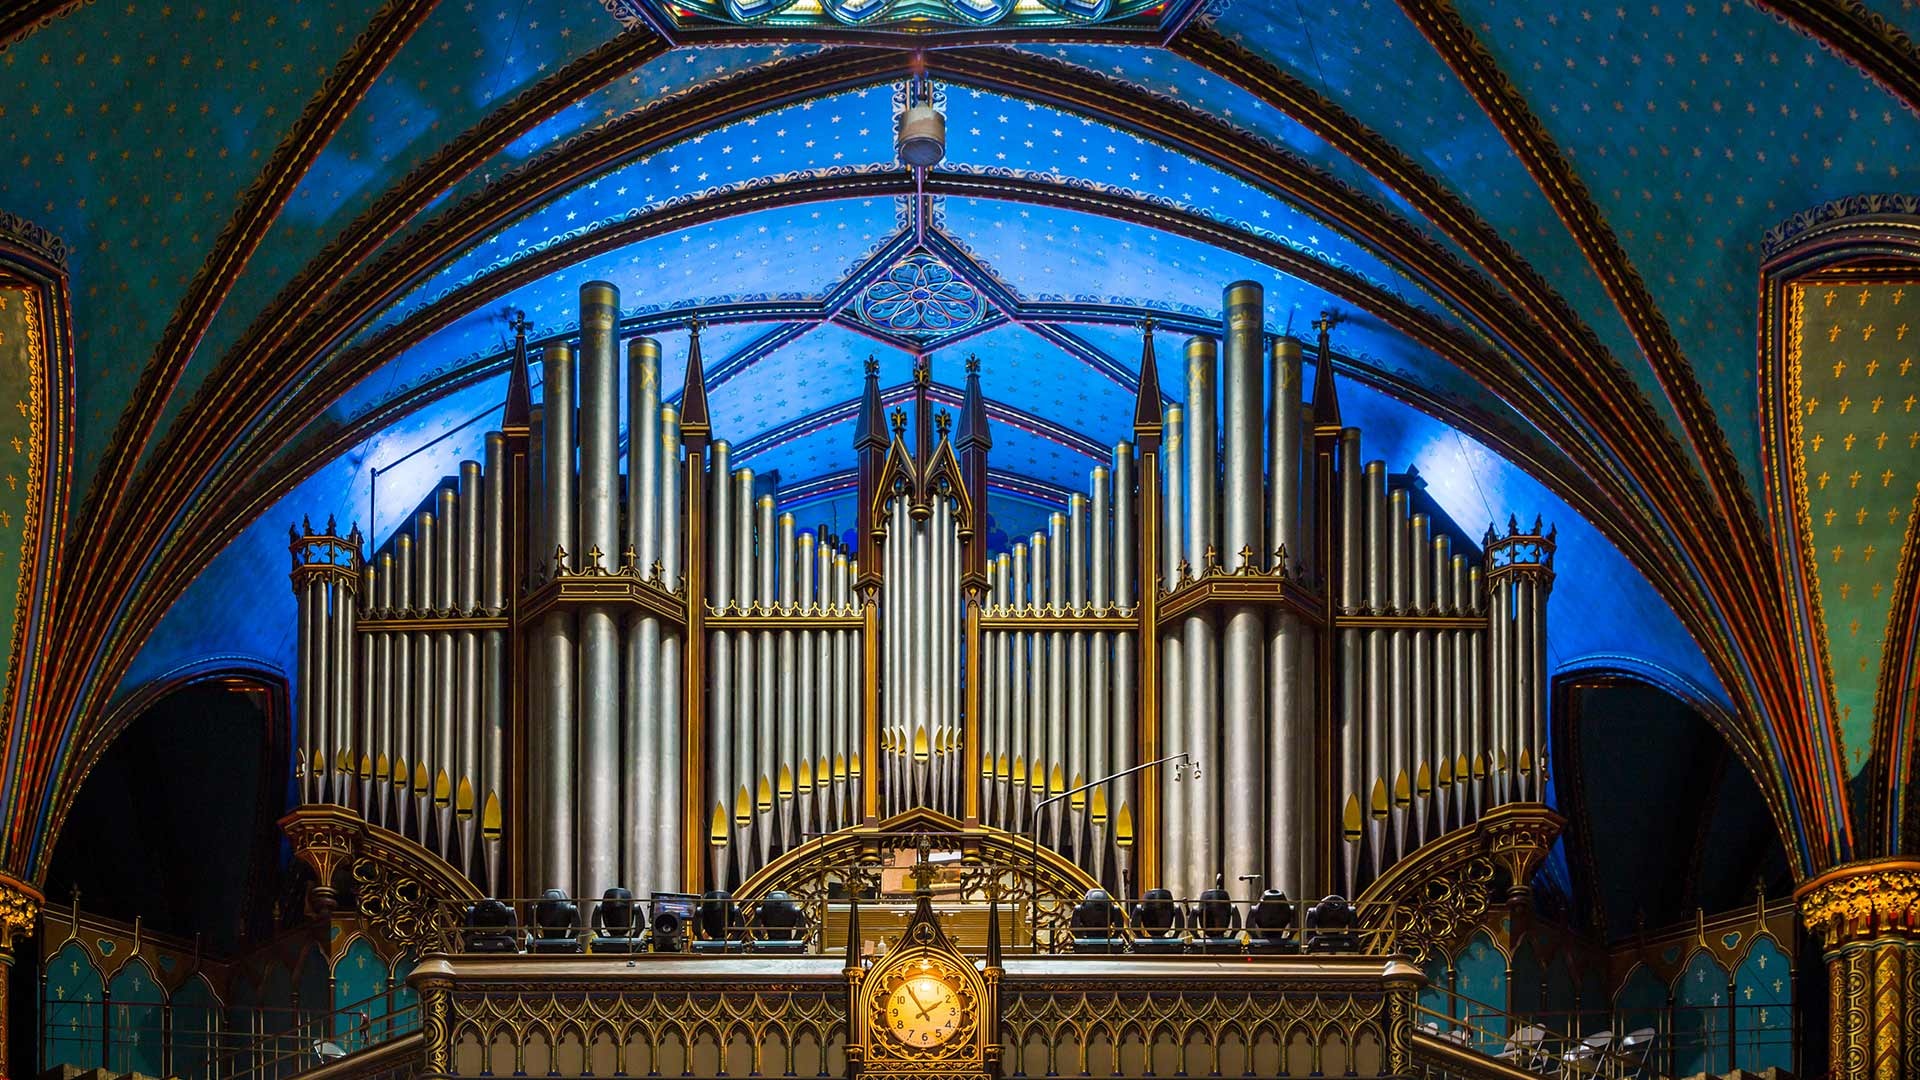 Pipe Organ: A large musical instrument with keys like a piano, Keyboard wind musical instrument. 1920x1080 Full HD Wallpaper.